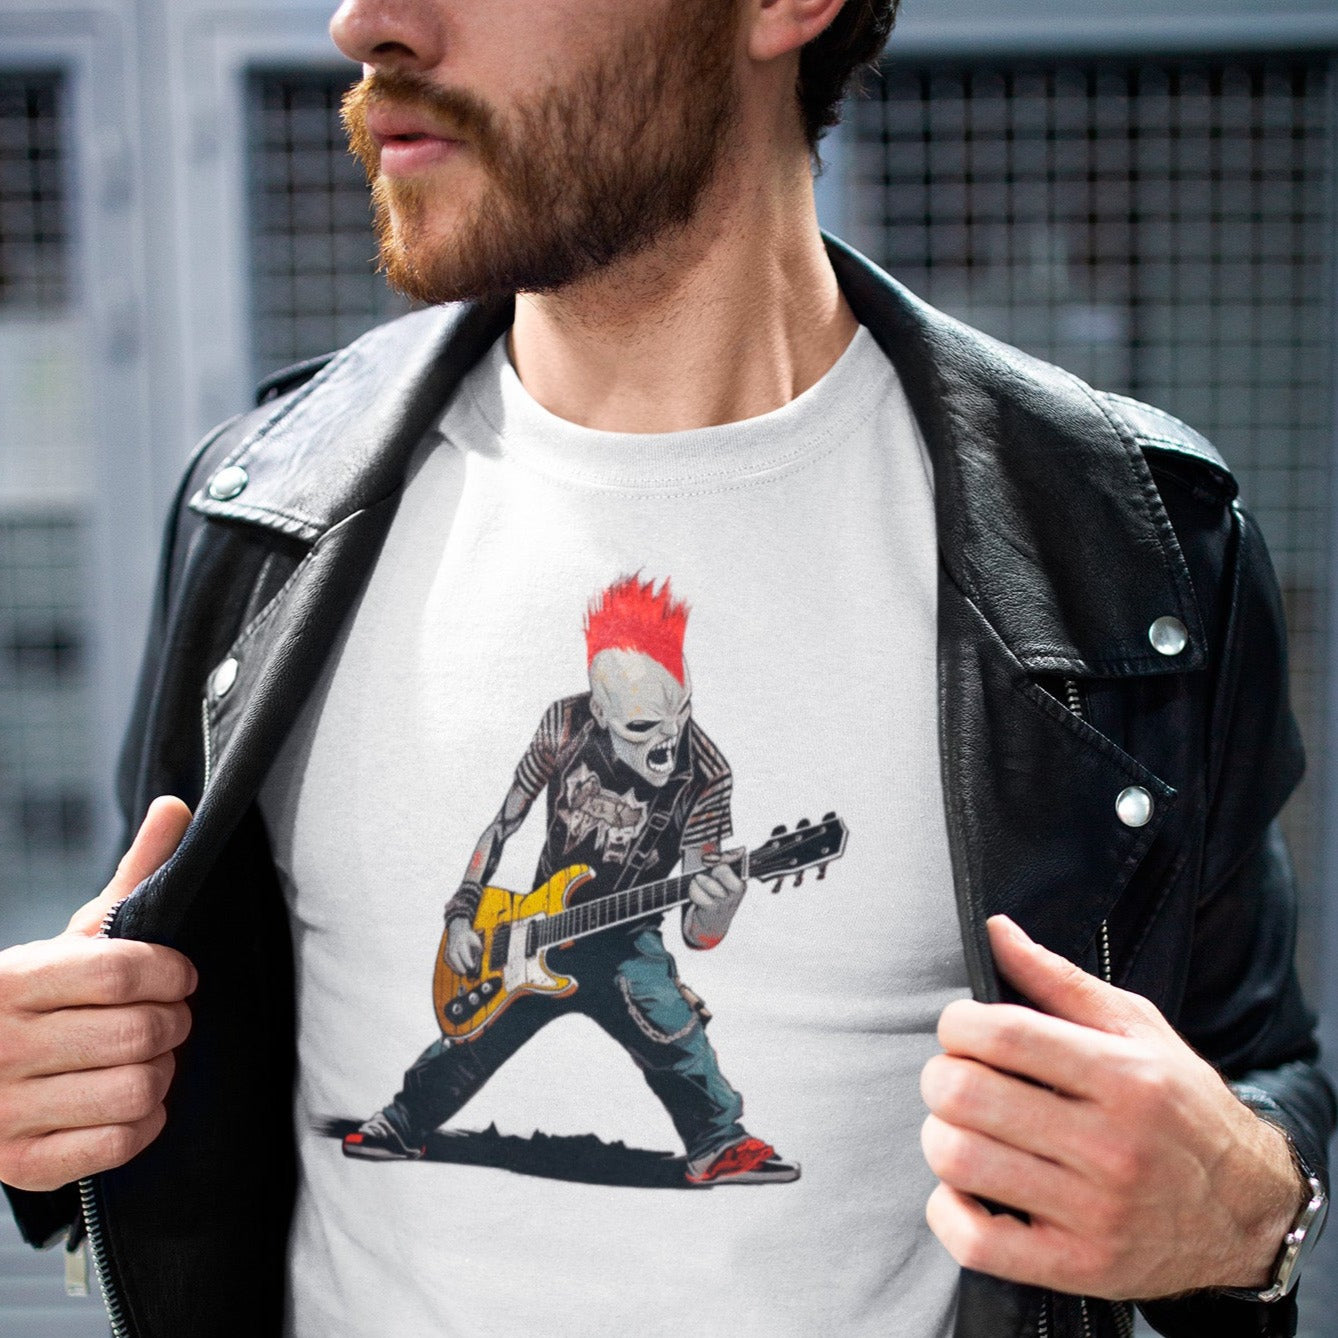 undead-shred-punk-white-t-shirt-mockup-of-a-man-wearing-a-leather-jacket-on-the-street